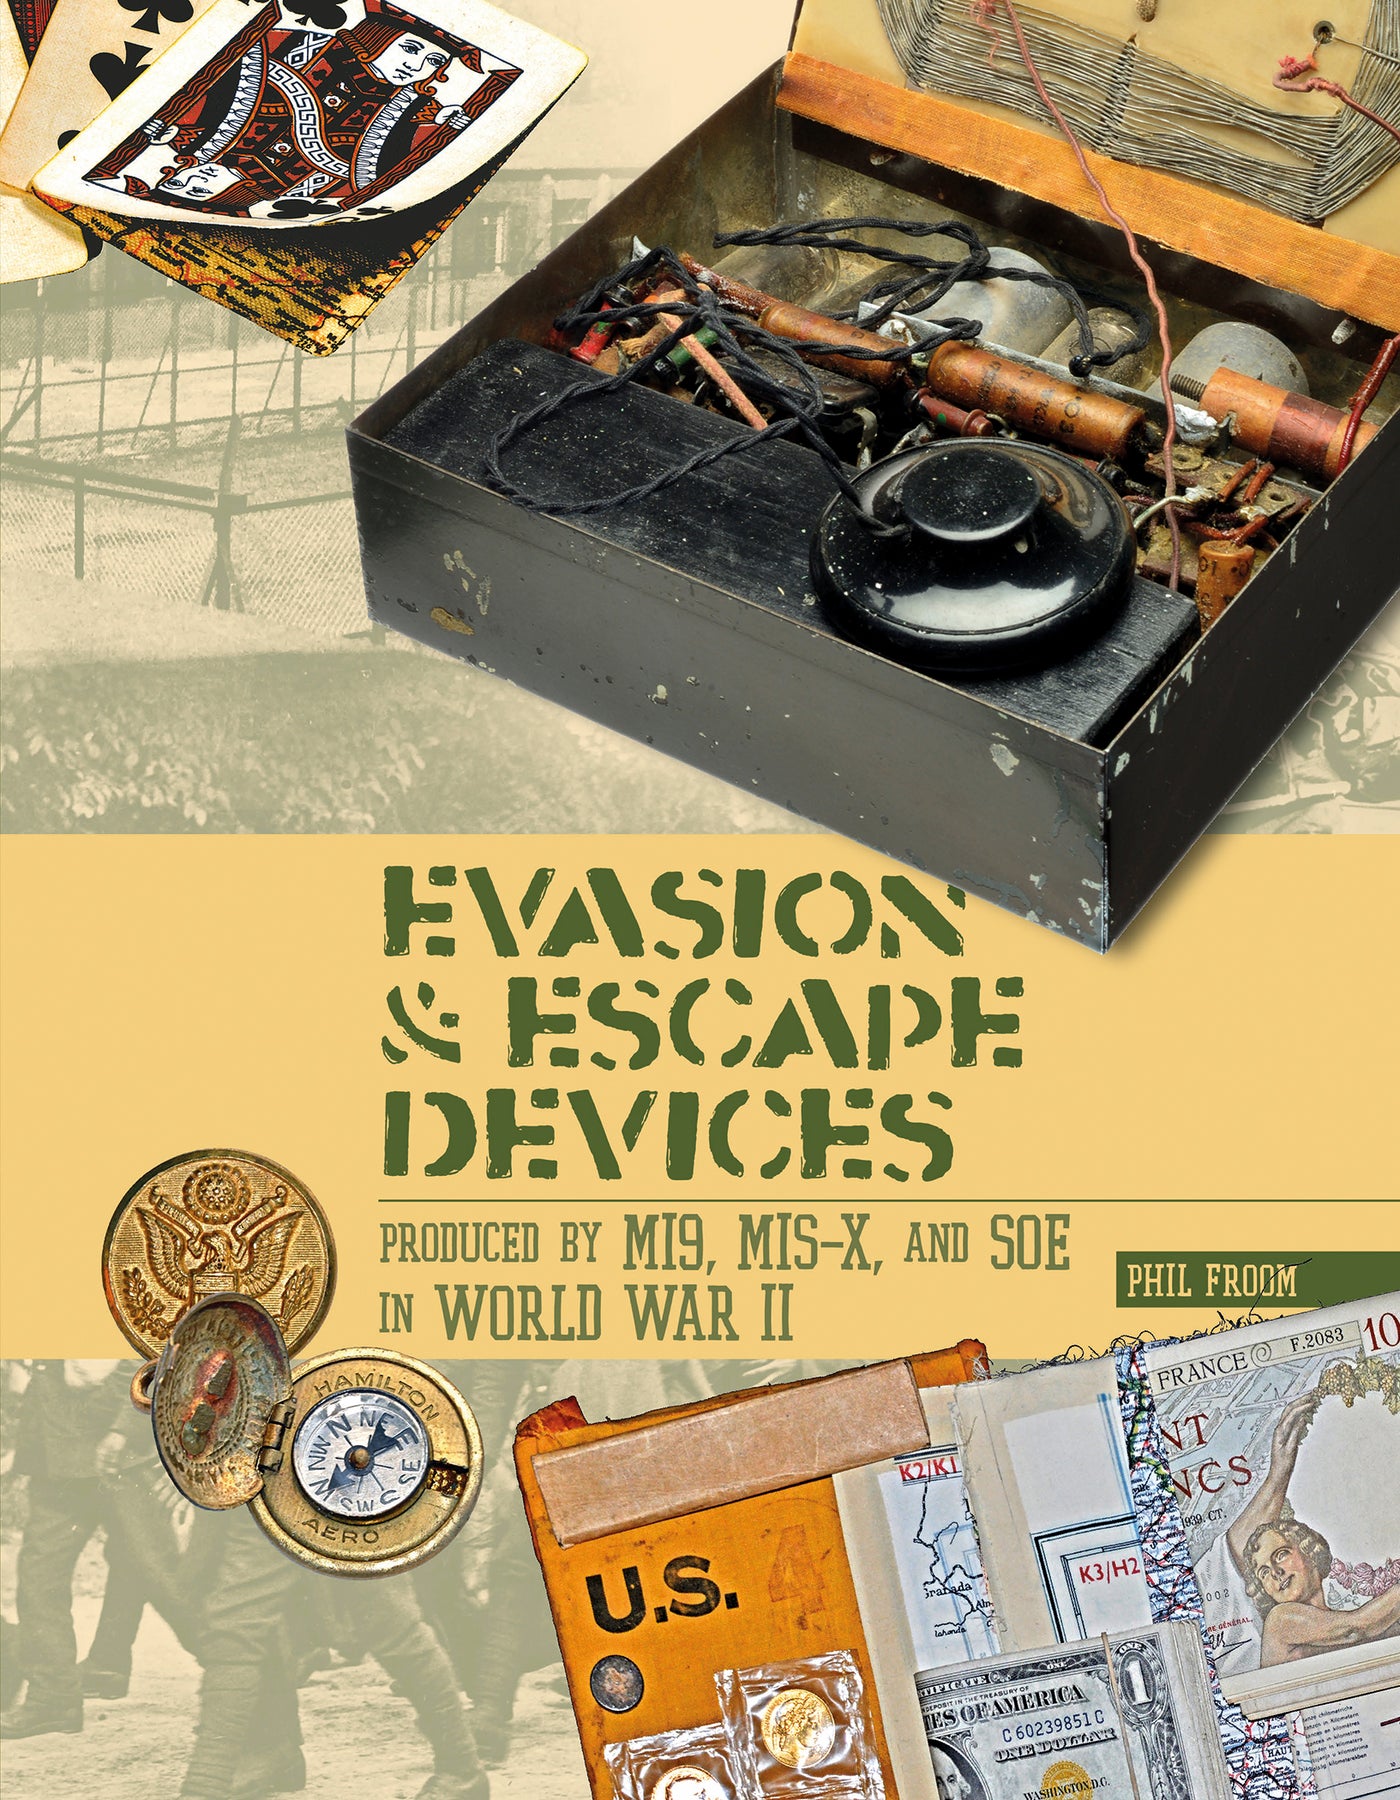 Evasion and Escape Devices Produced by MI9, MIS-X, and SOE in World War II